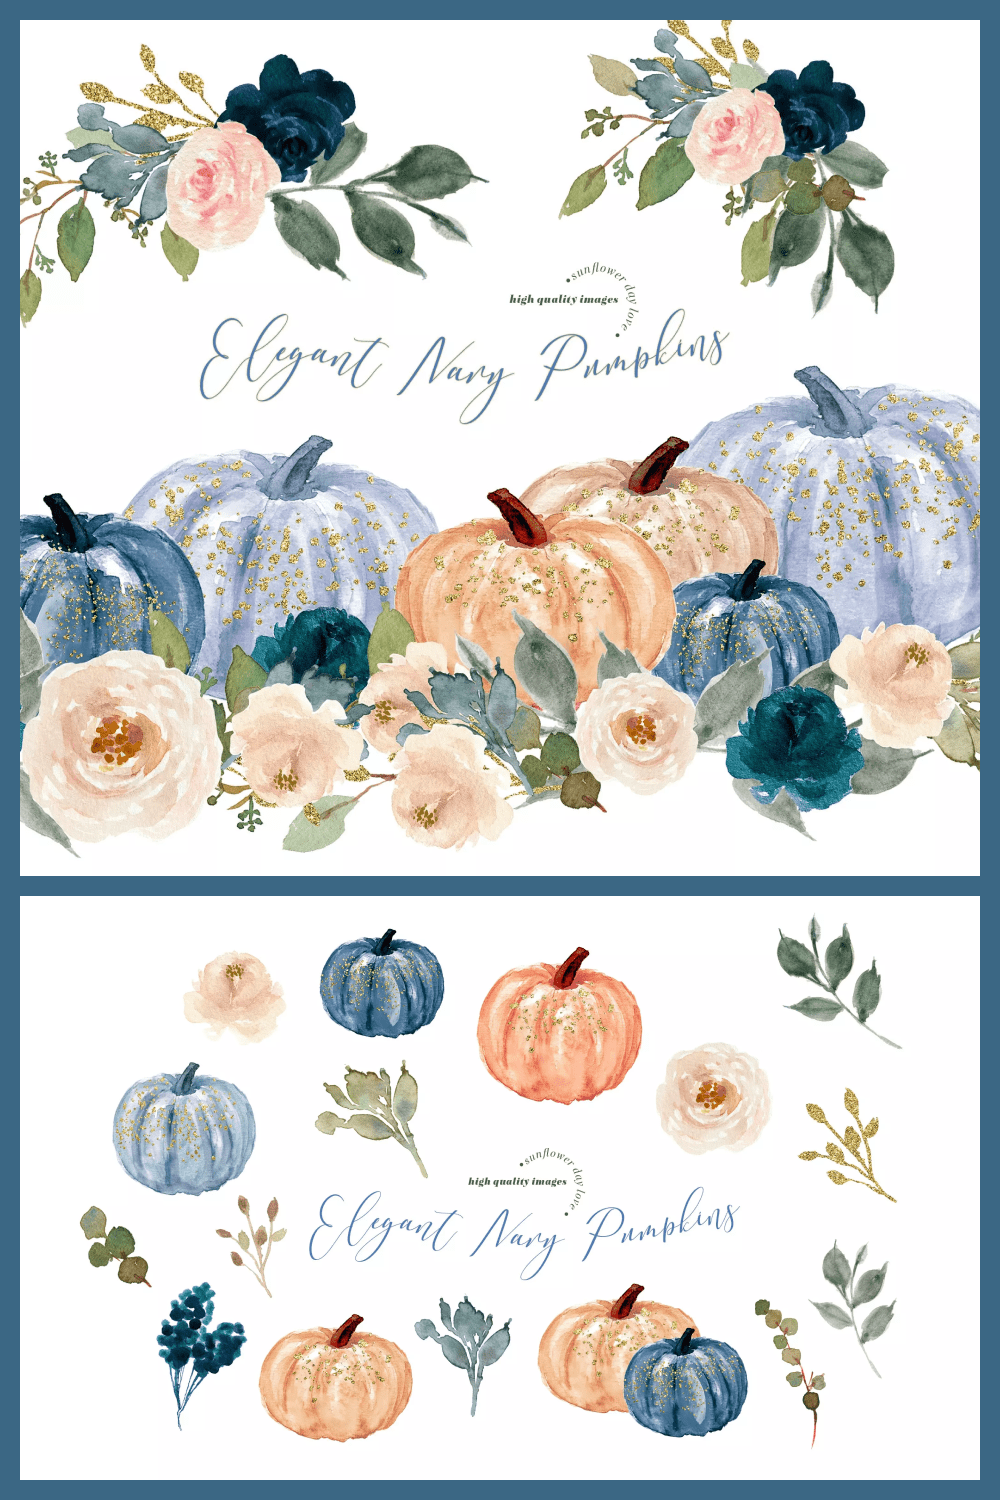 Collage with beige and blue pumpkins with twigs and flowers.